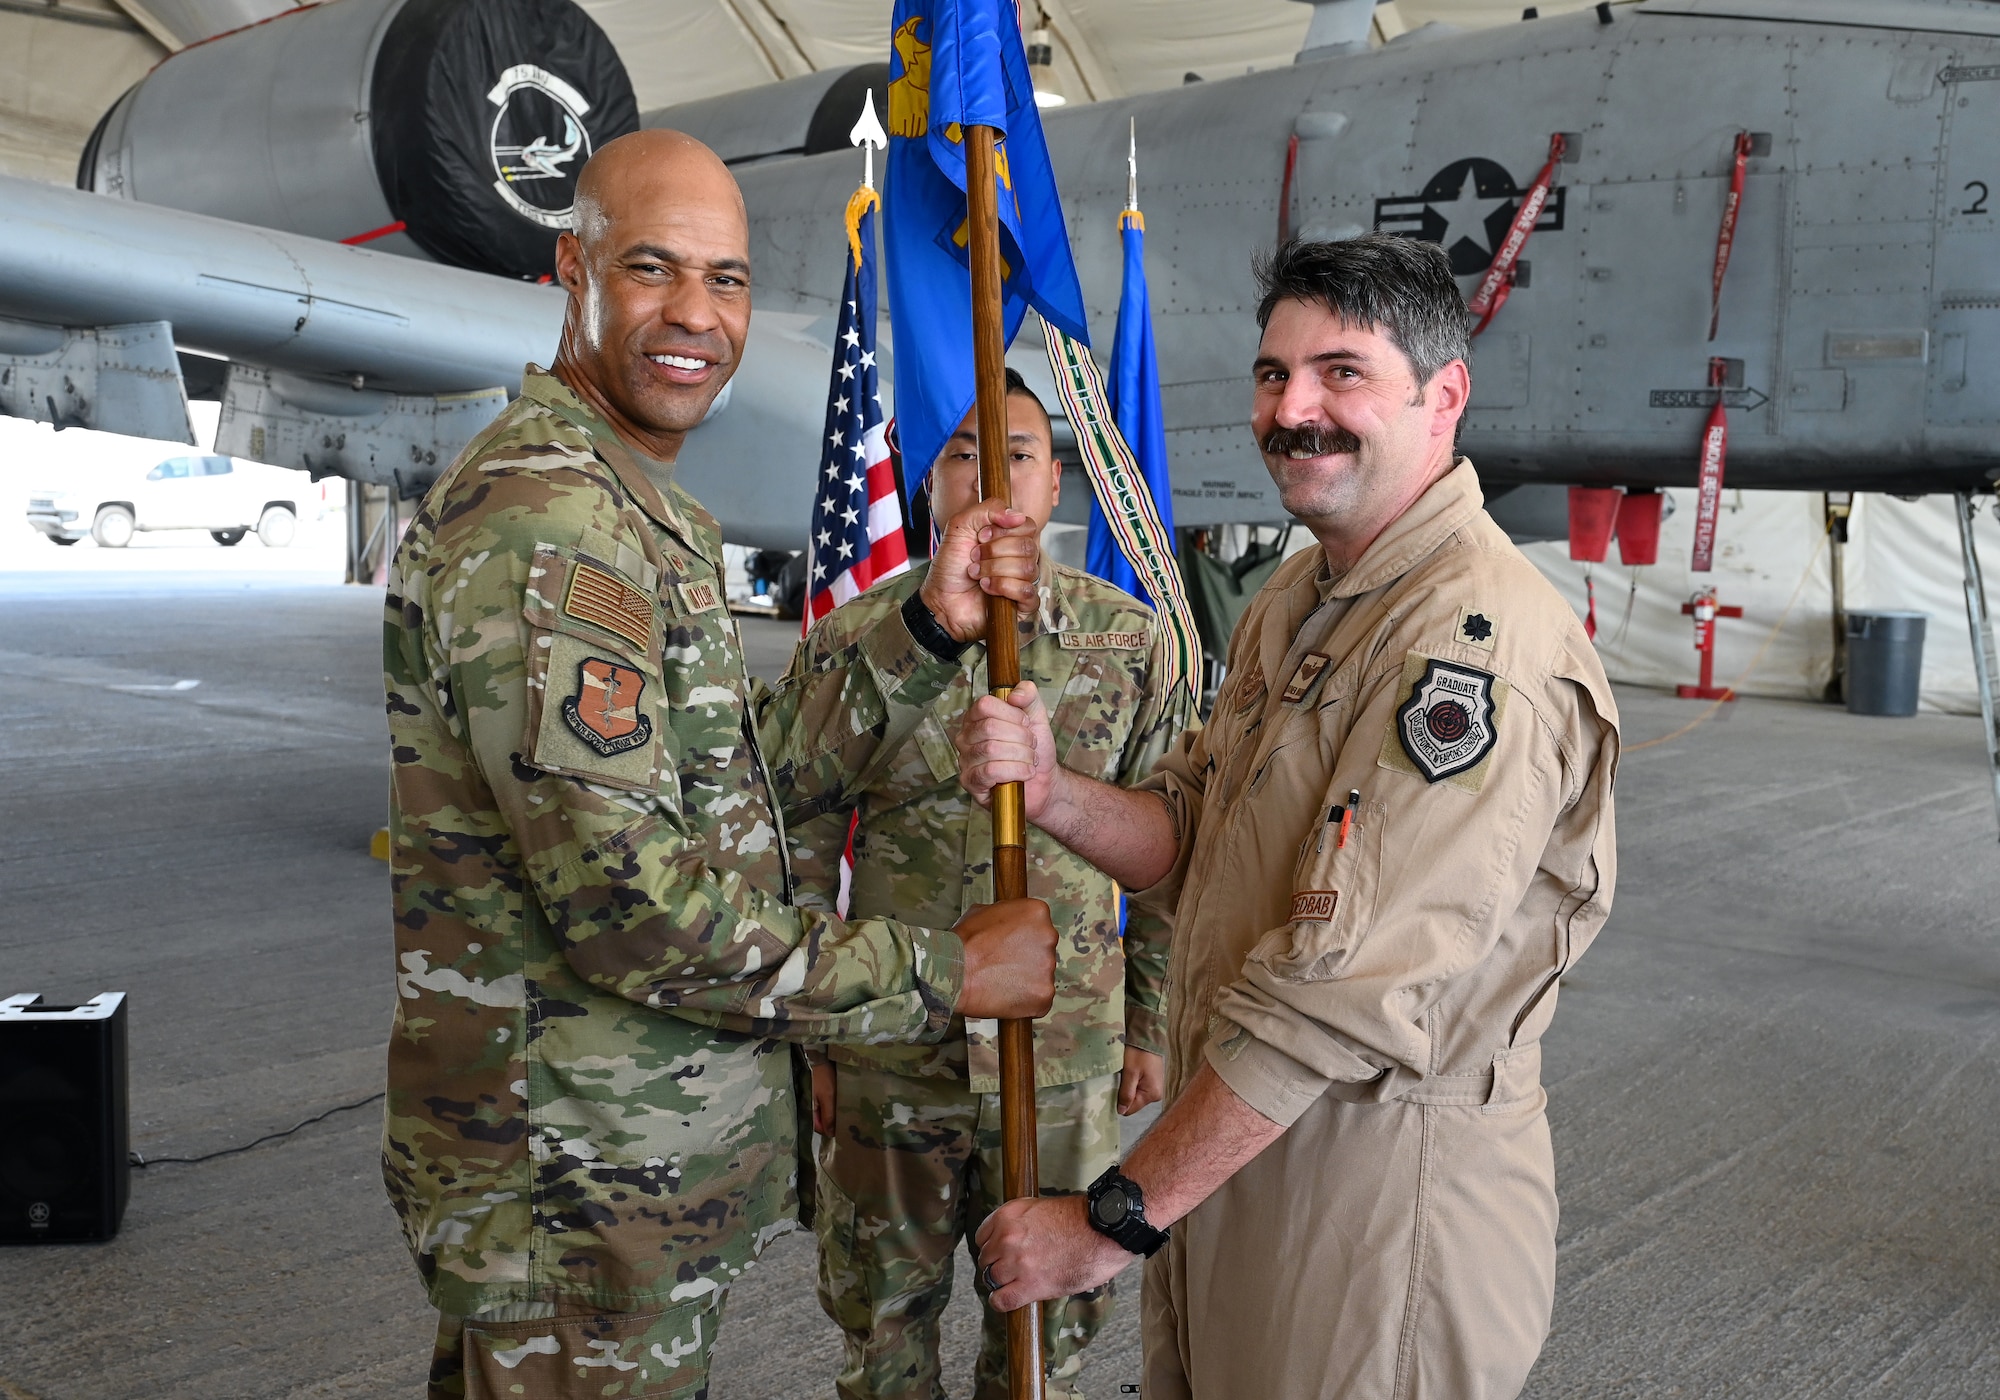 A photo of two Airmen holding a guidon.